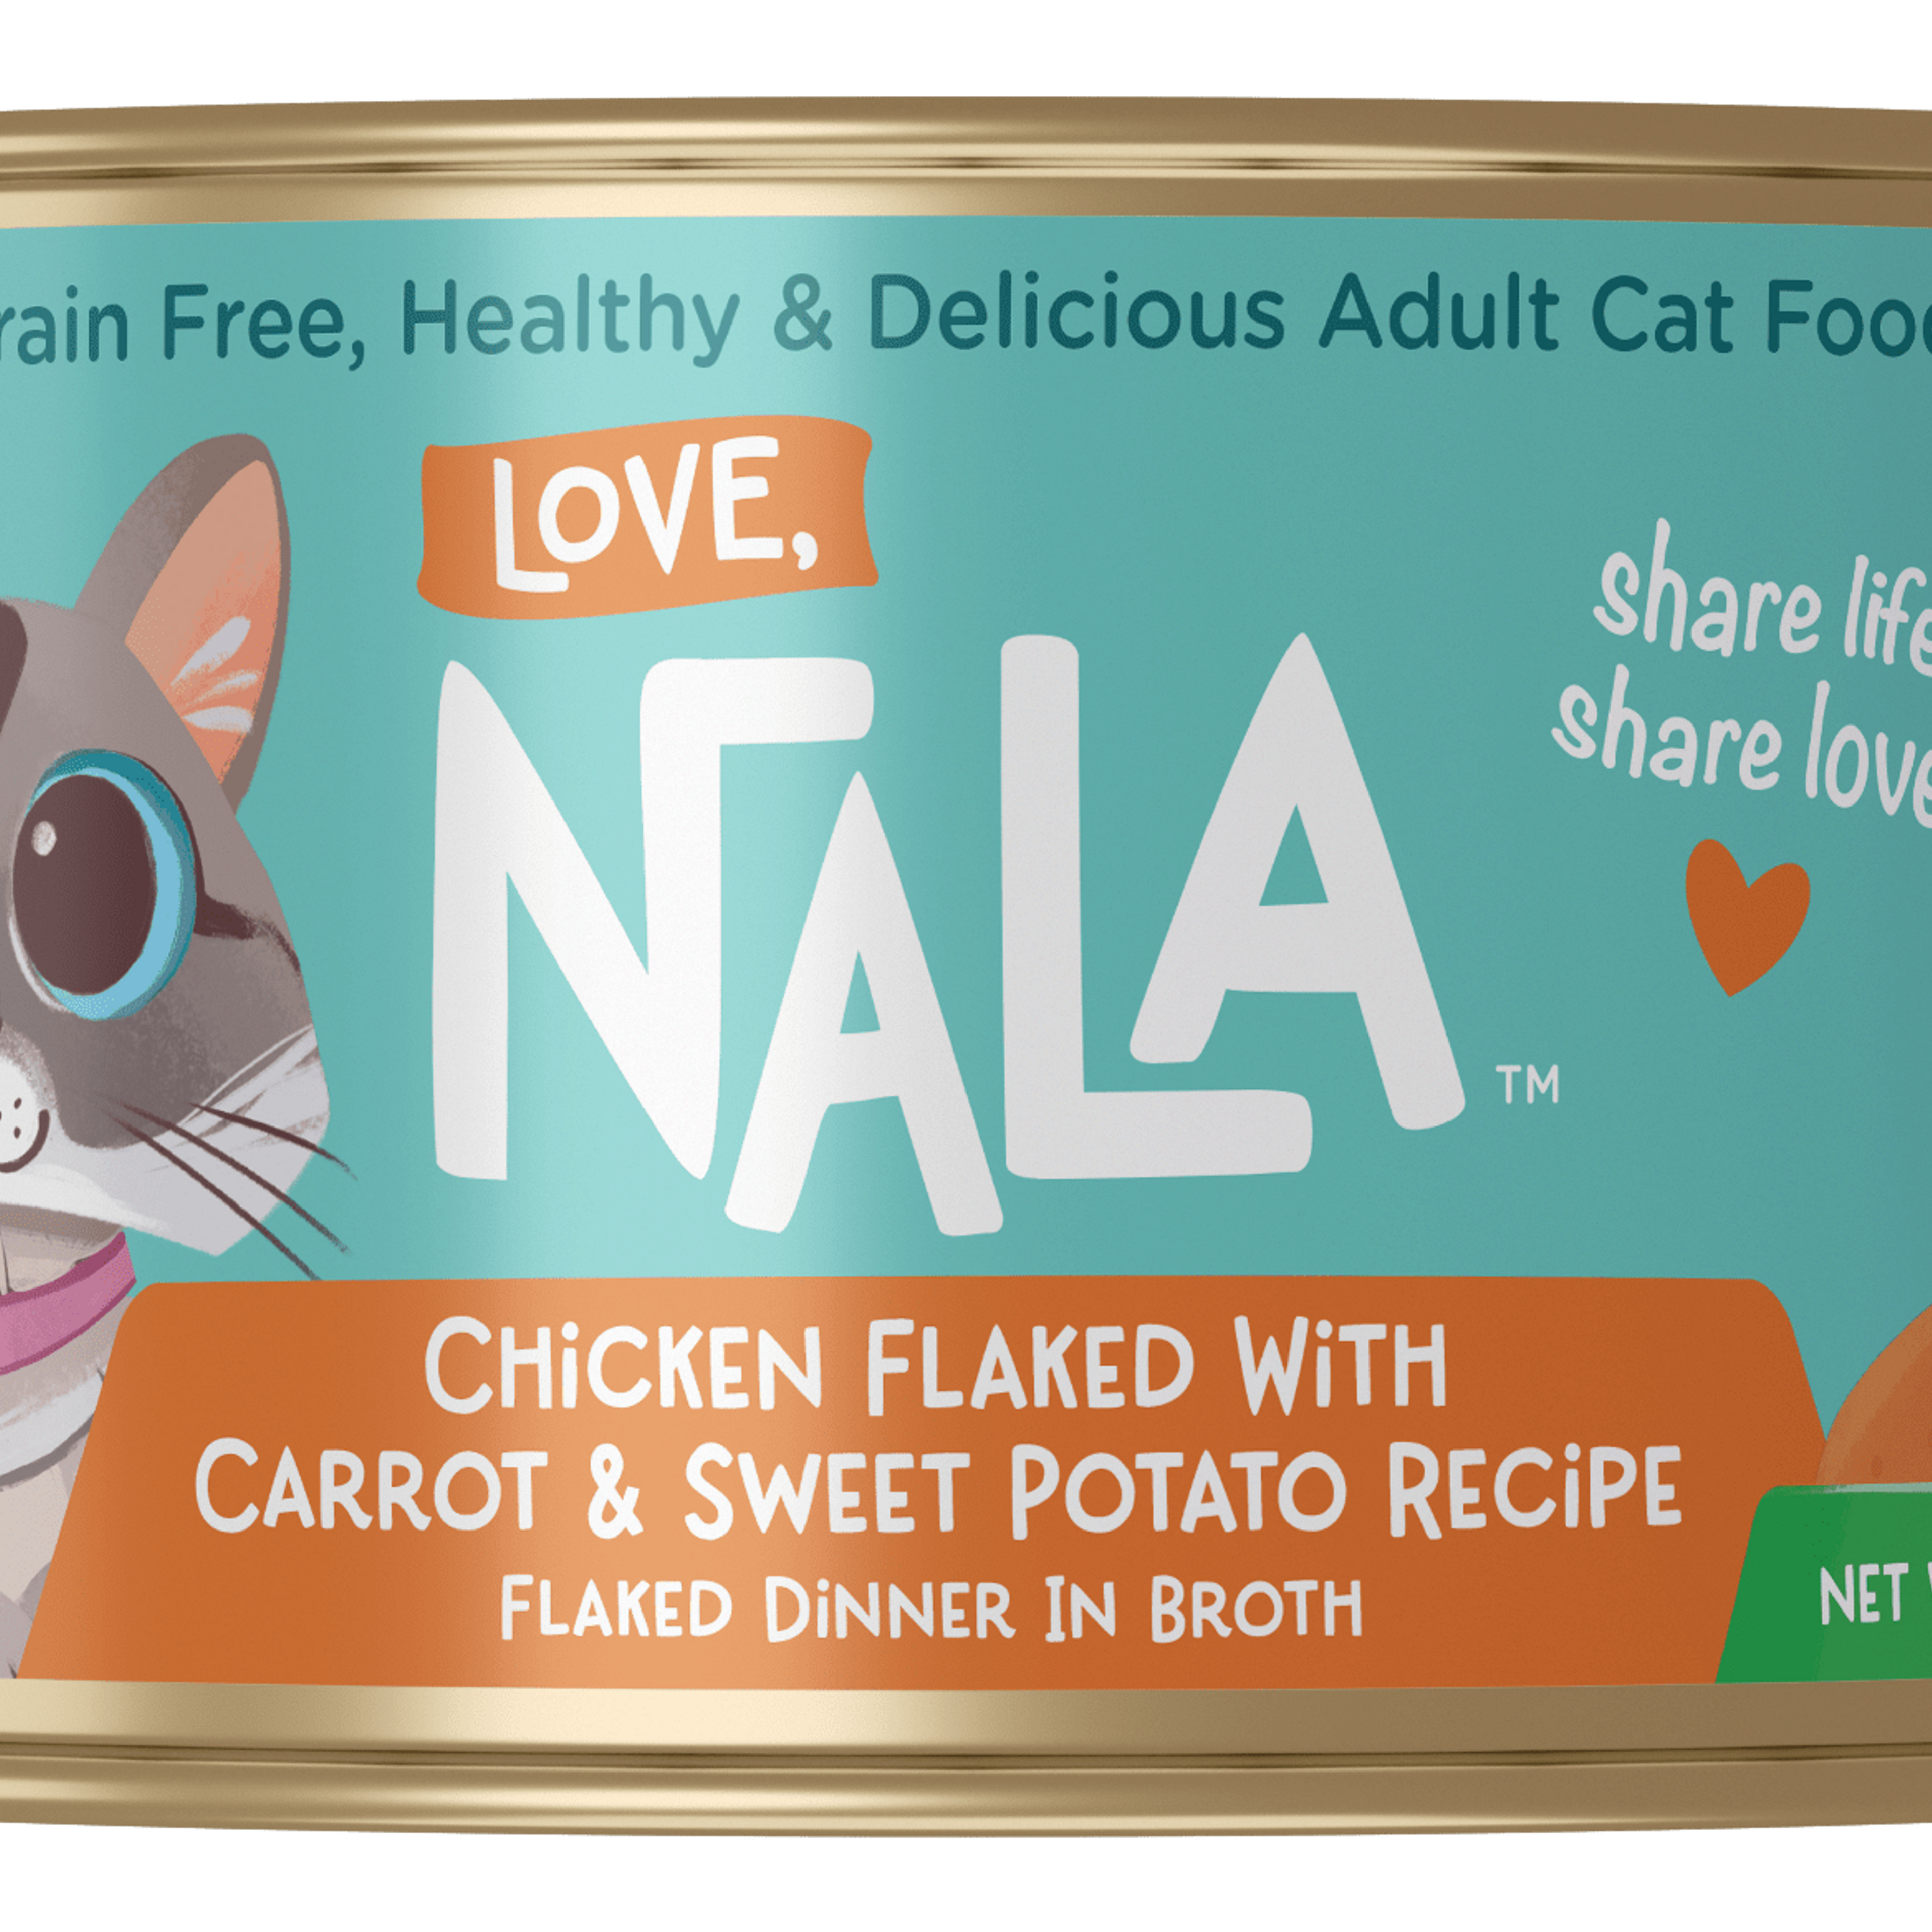 Chicken Flaked With Carrot & Sweet Potato Recipe Dinner In Broth Adult Cat Food, 2.8-oz, Case of 12